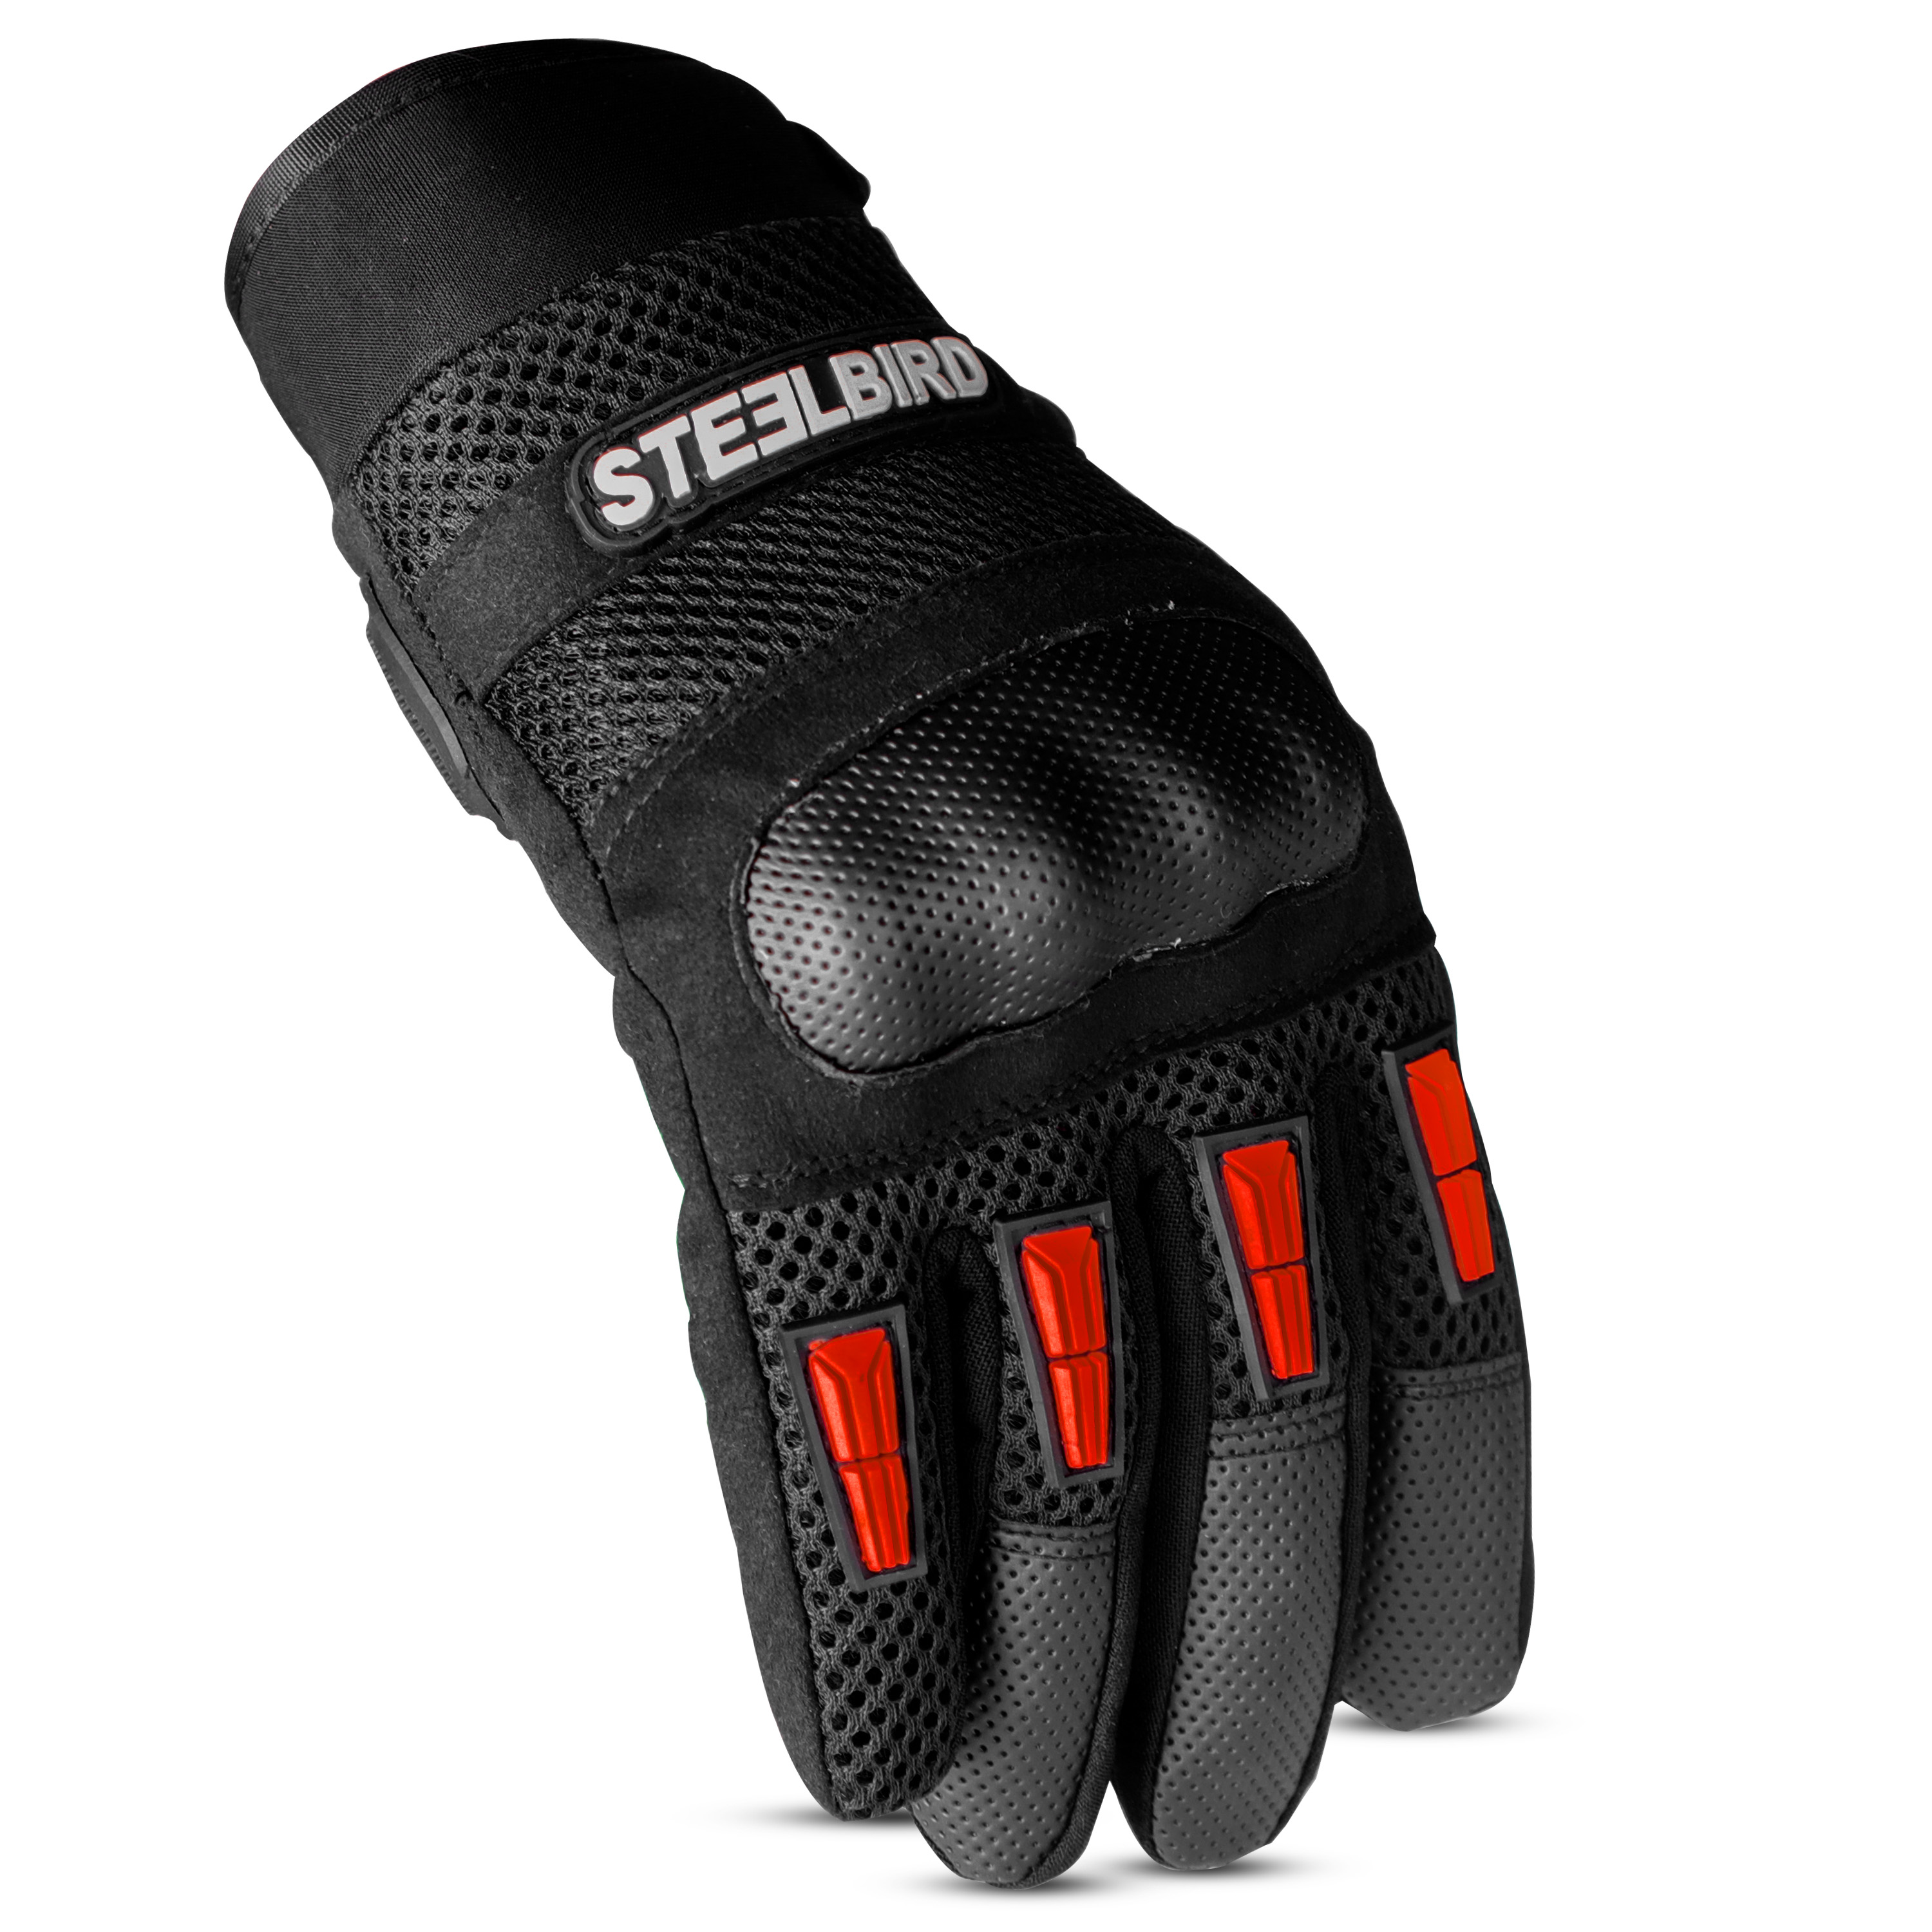 Steelbird Khardungla Full Finger Bike Riding Gloves with Touch Screen Sensitivity at Thumb and Index Finger, Protective Off-Road Motorbike Racing (Red)